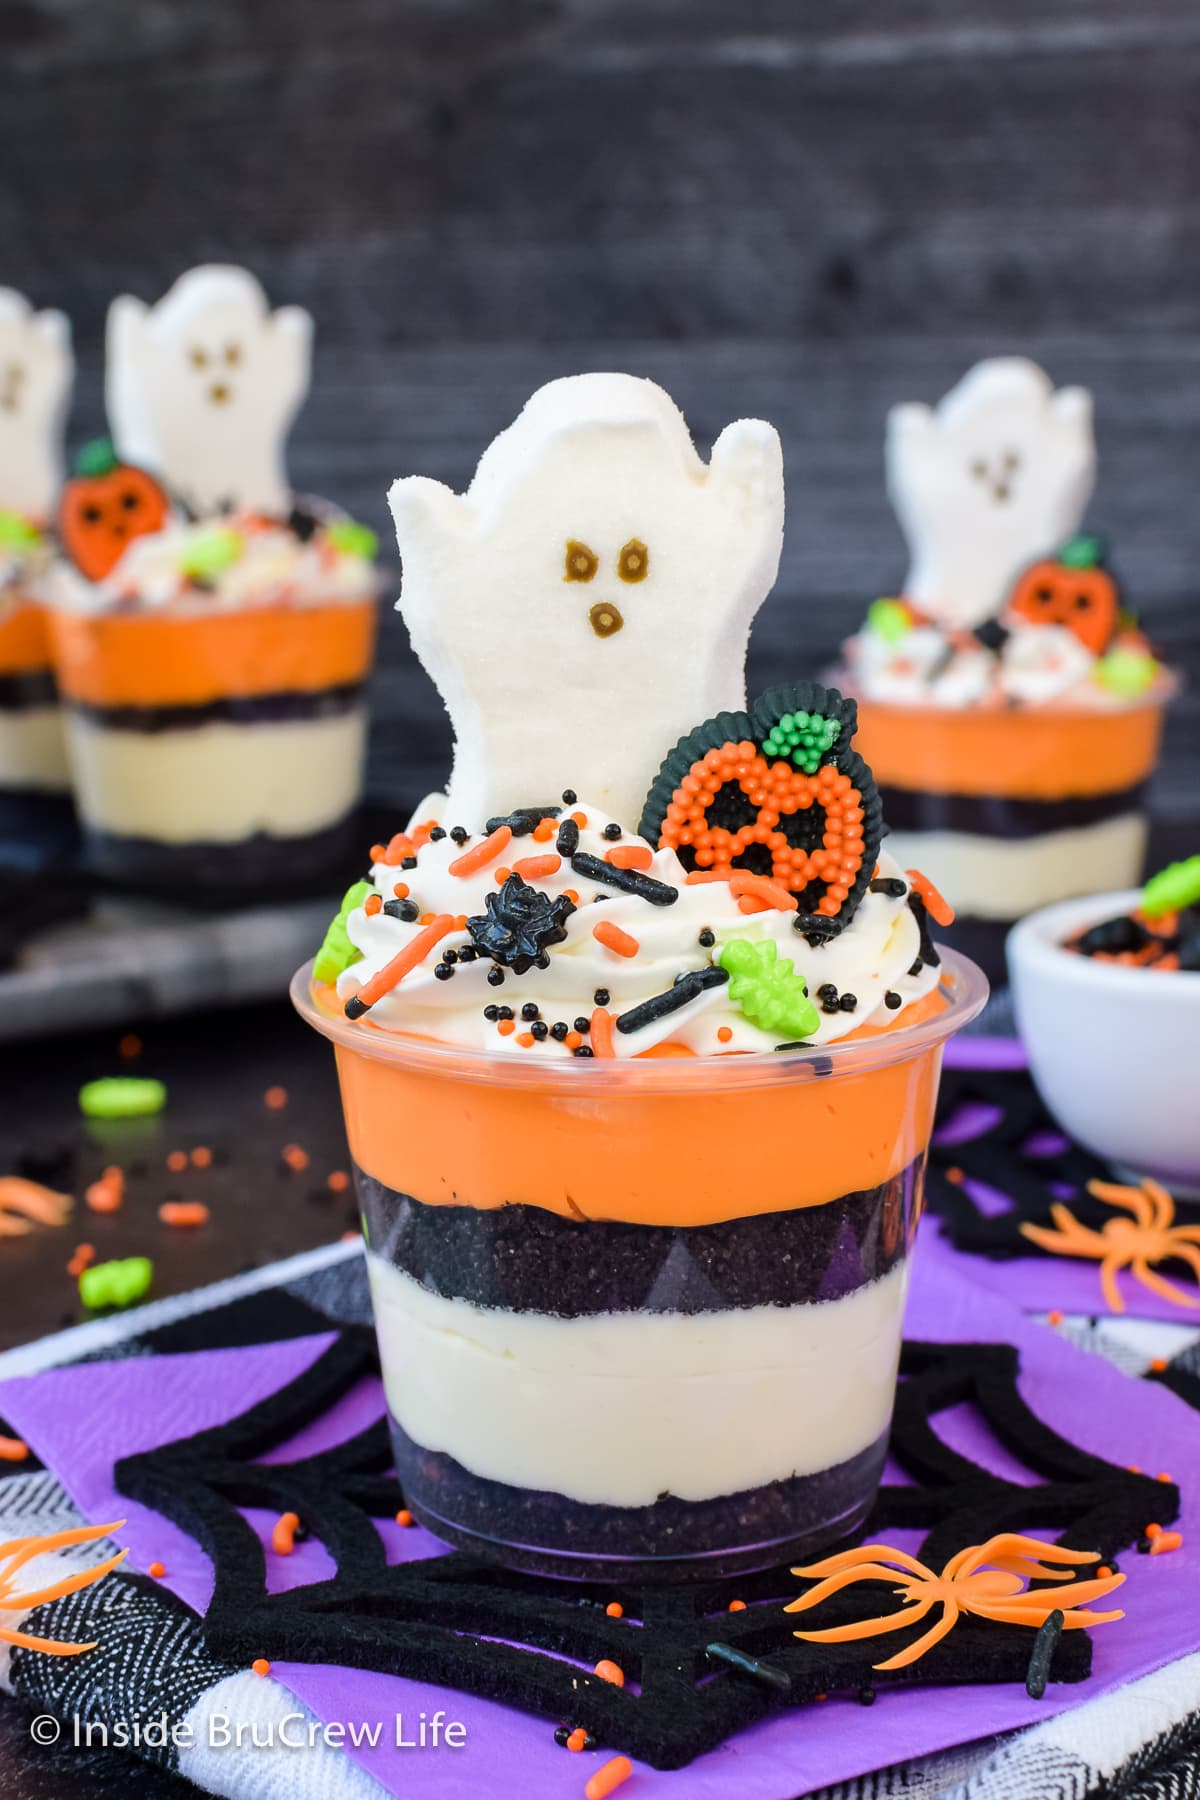 Clear cups filled with colorful cream cheese and Oreo crumbs.